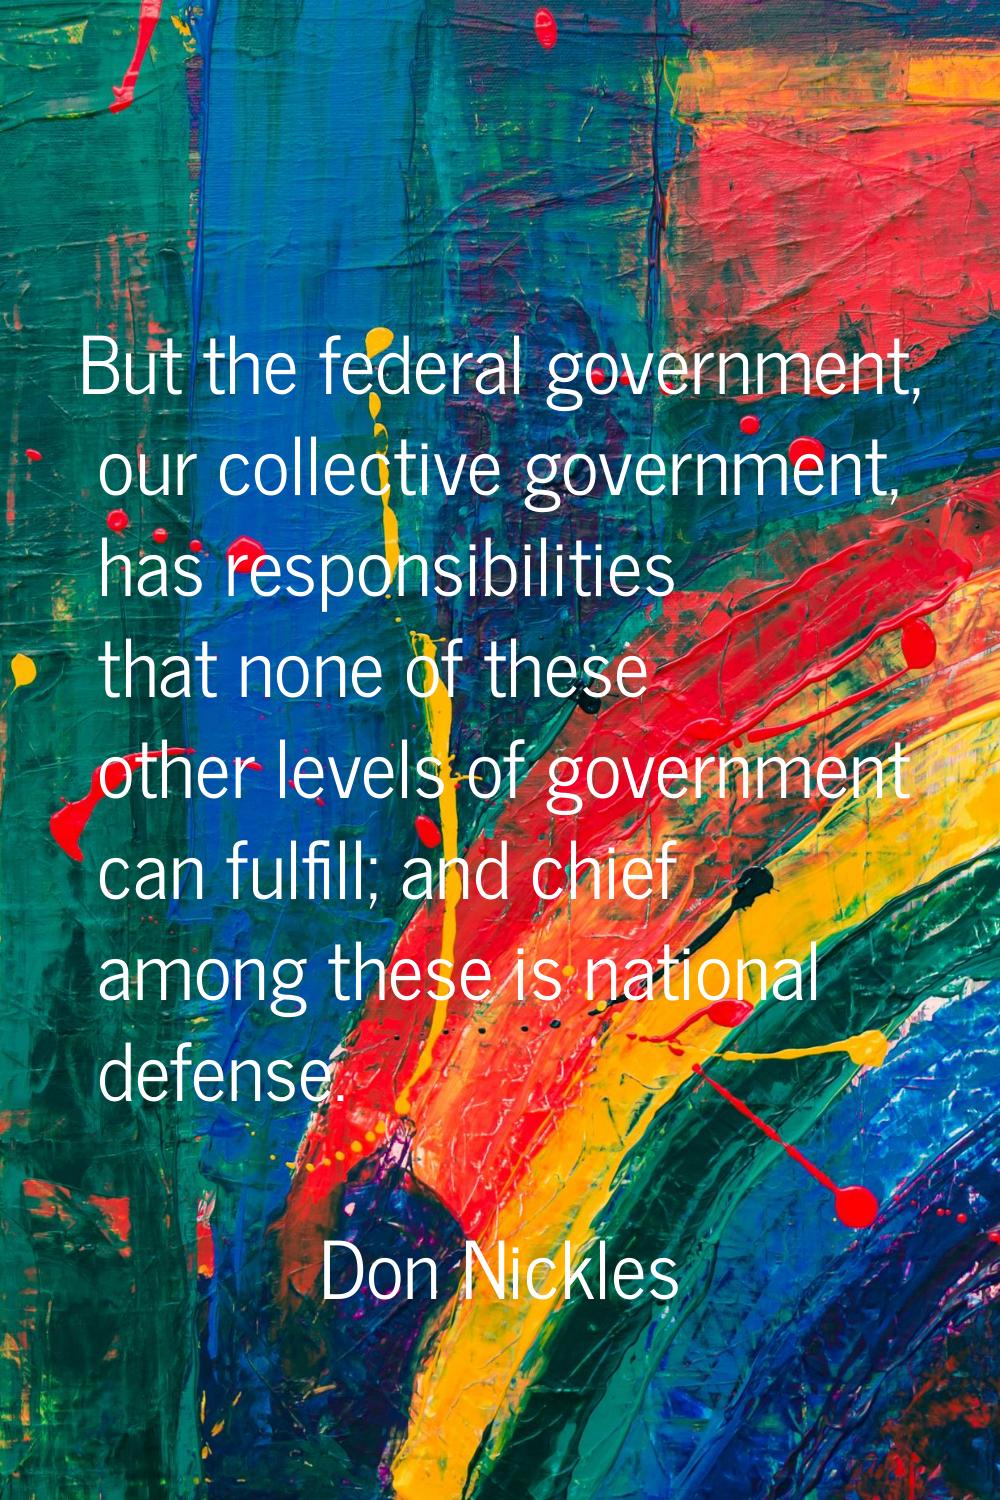 But the federal government, our collective government, has responsibilities that none of these othe